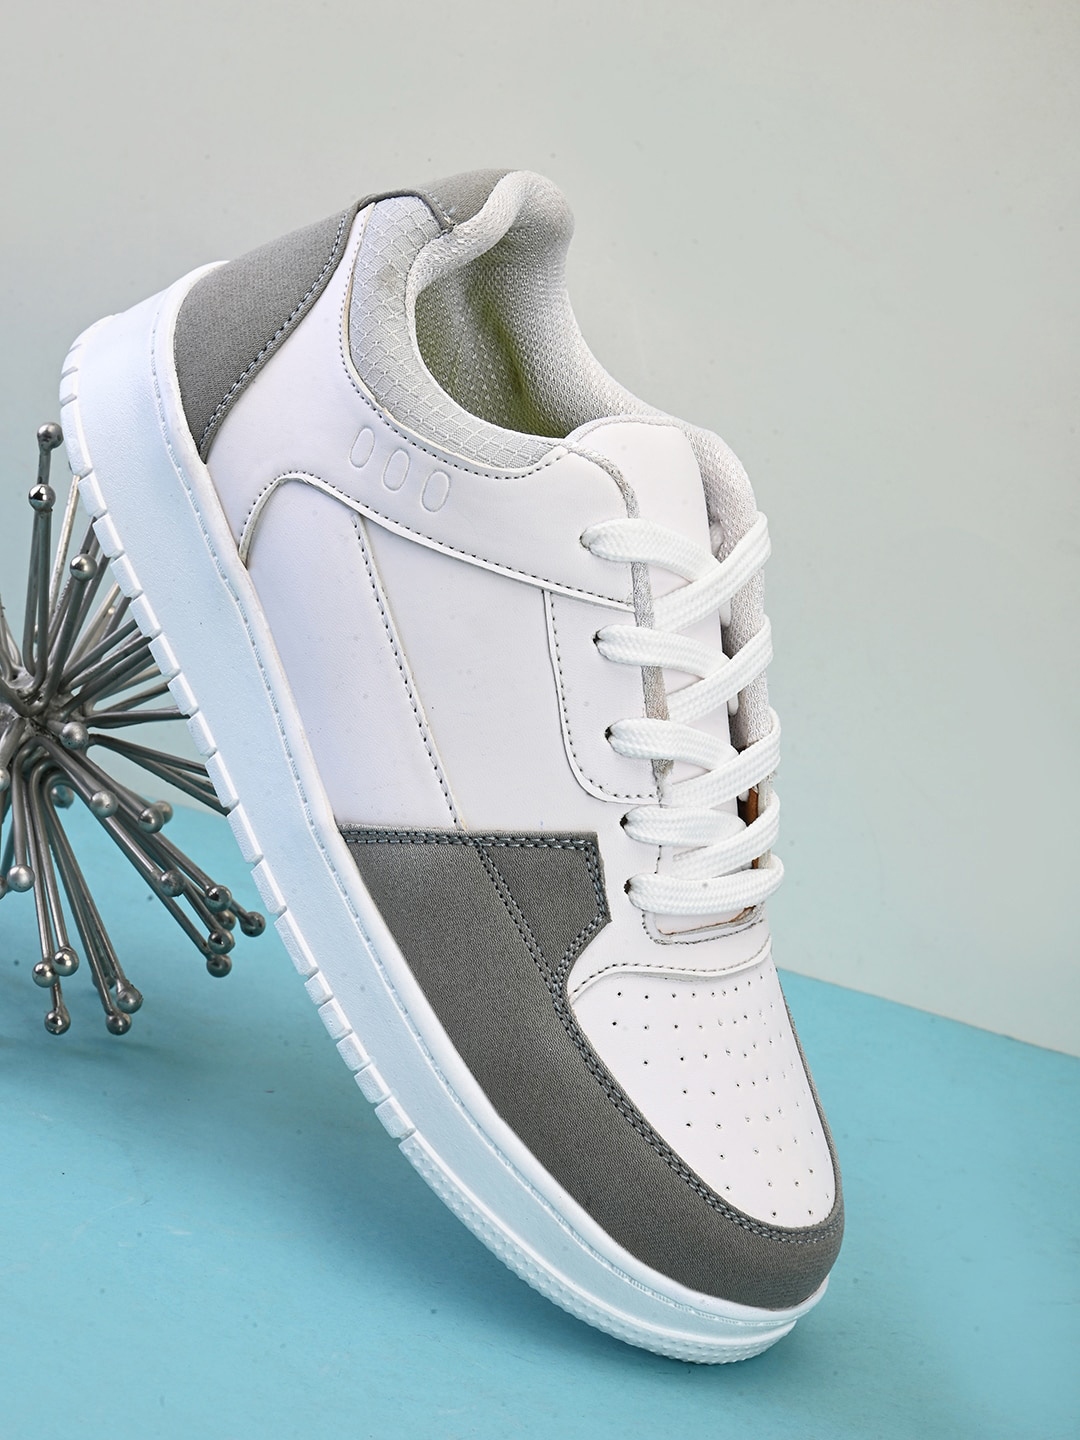 Buy The Roadster Lifestyle Co. Men Grey Colorblocked Round Toe Sneakers ...